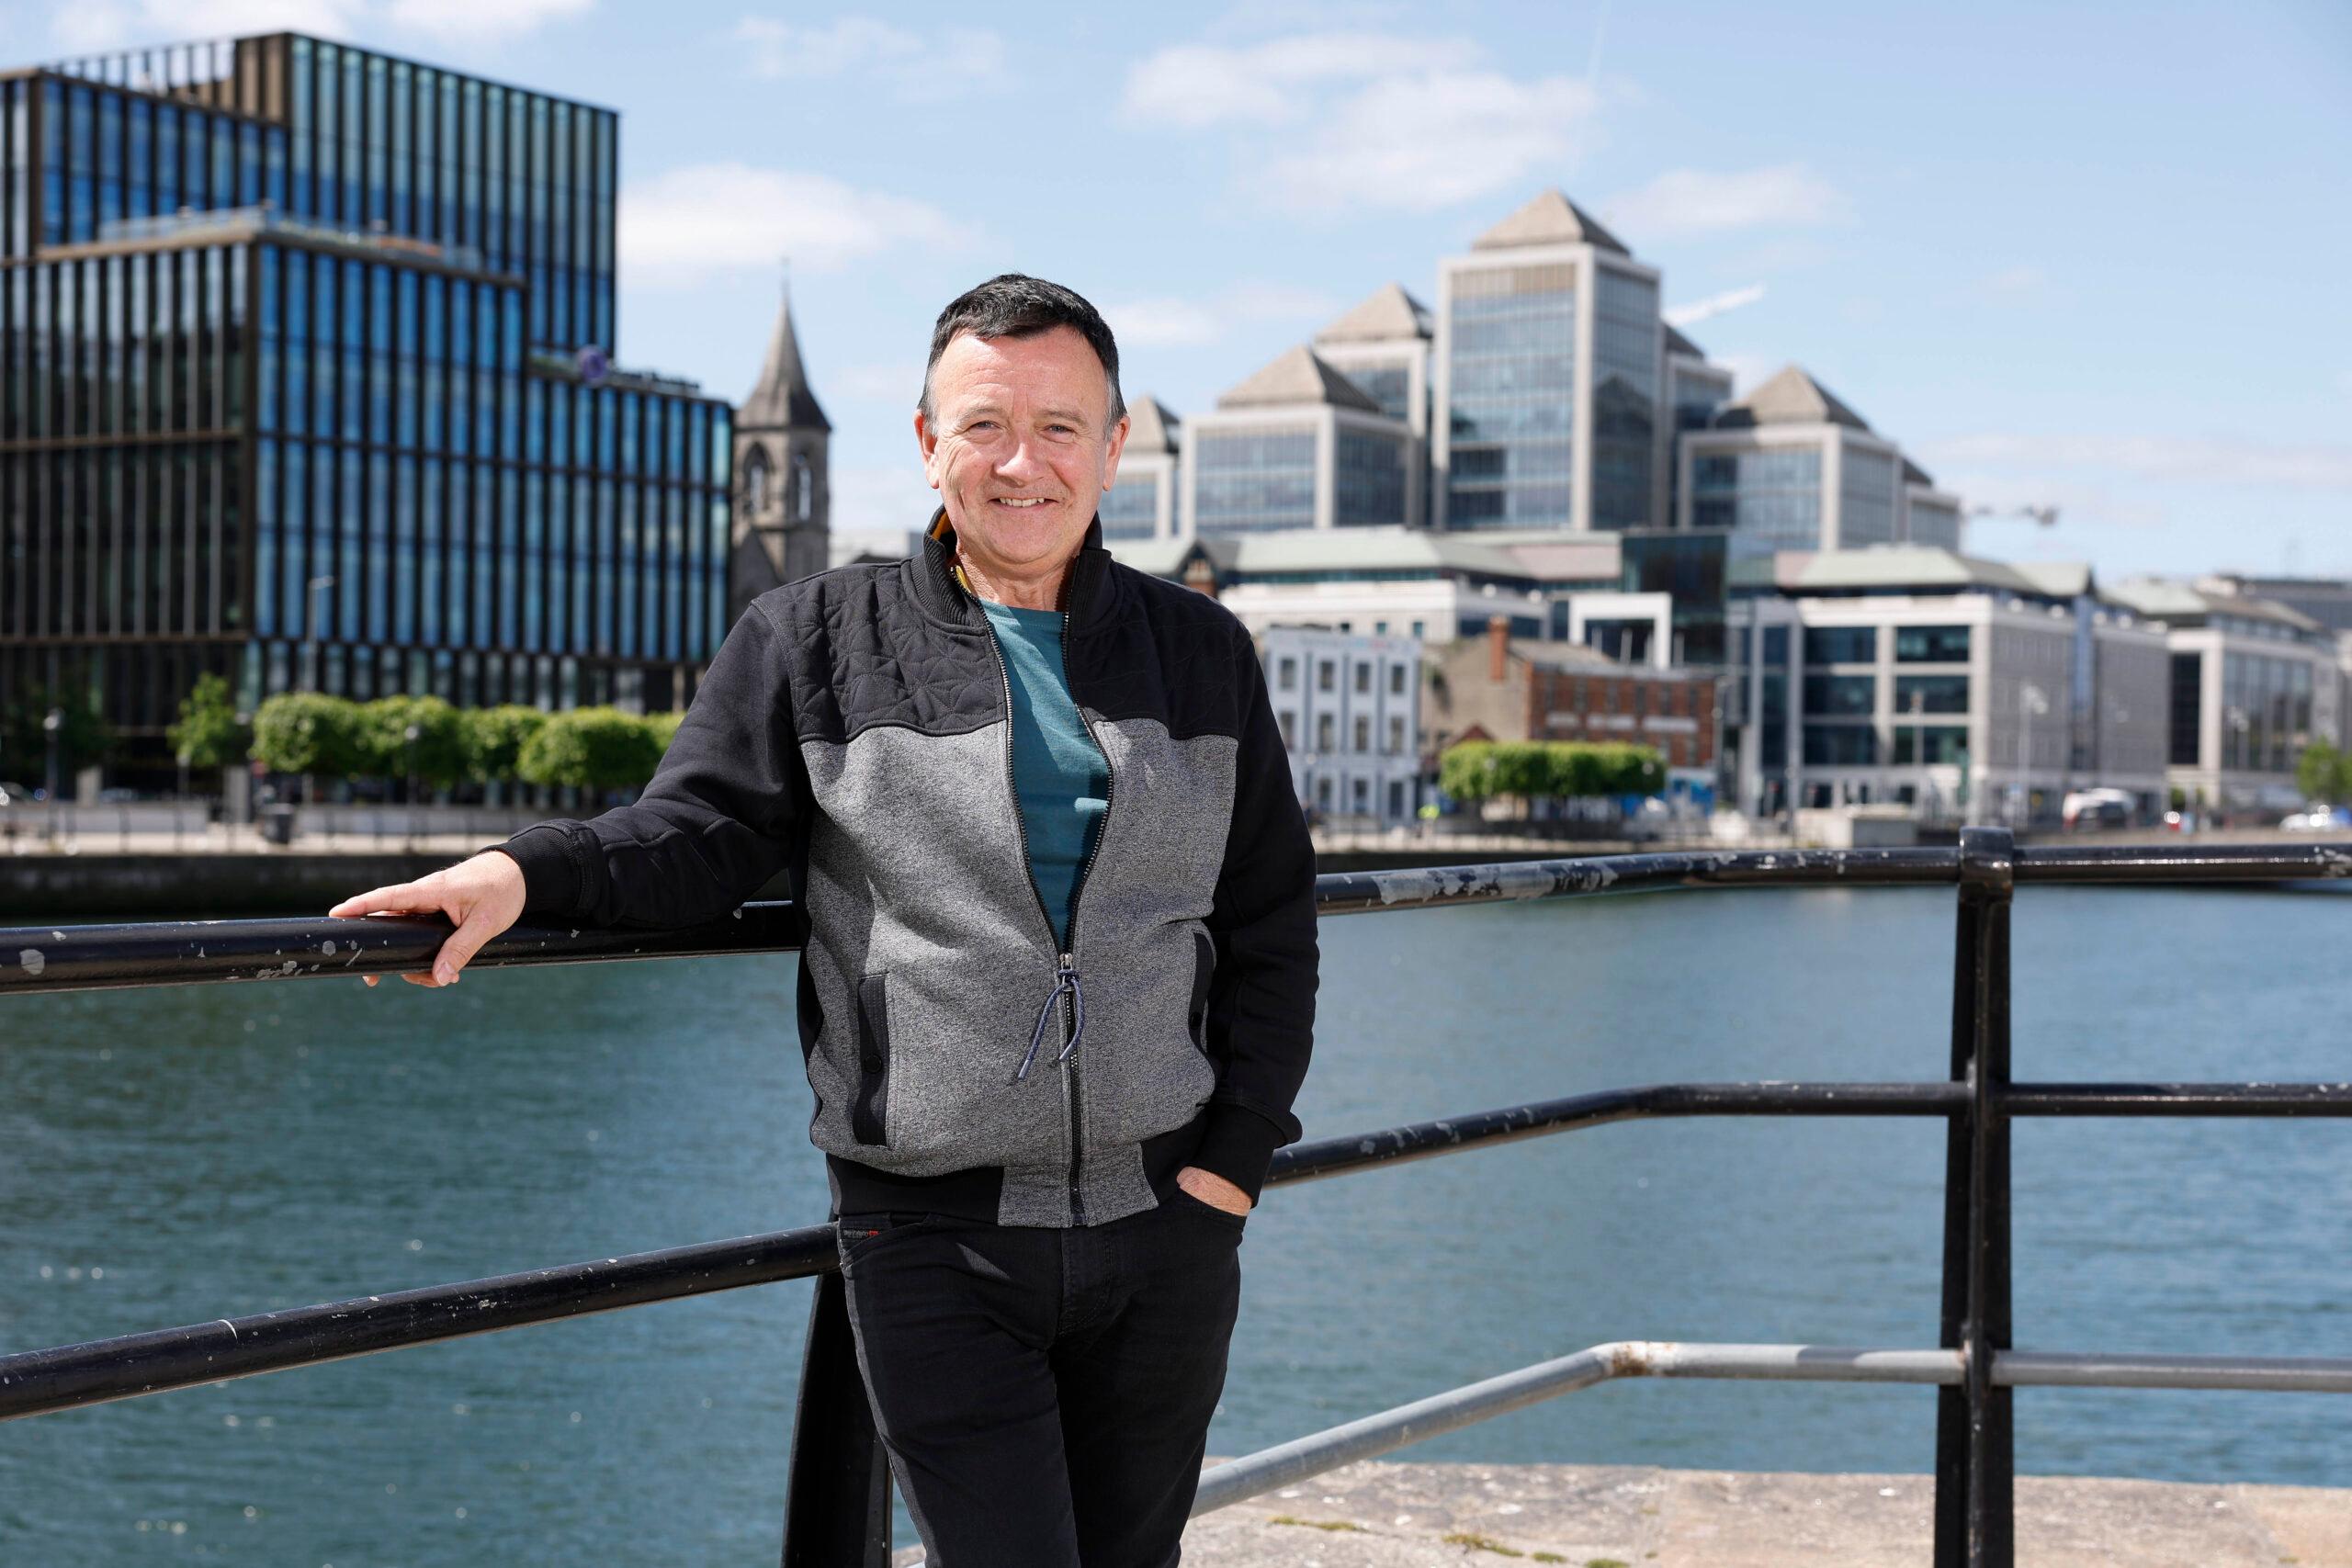 Colm Lyon, CEO and Founder of Fire. Picture: Conor McCabe Photography